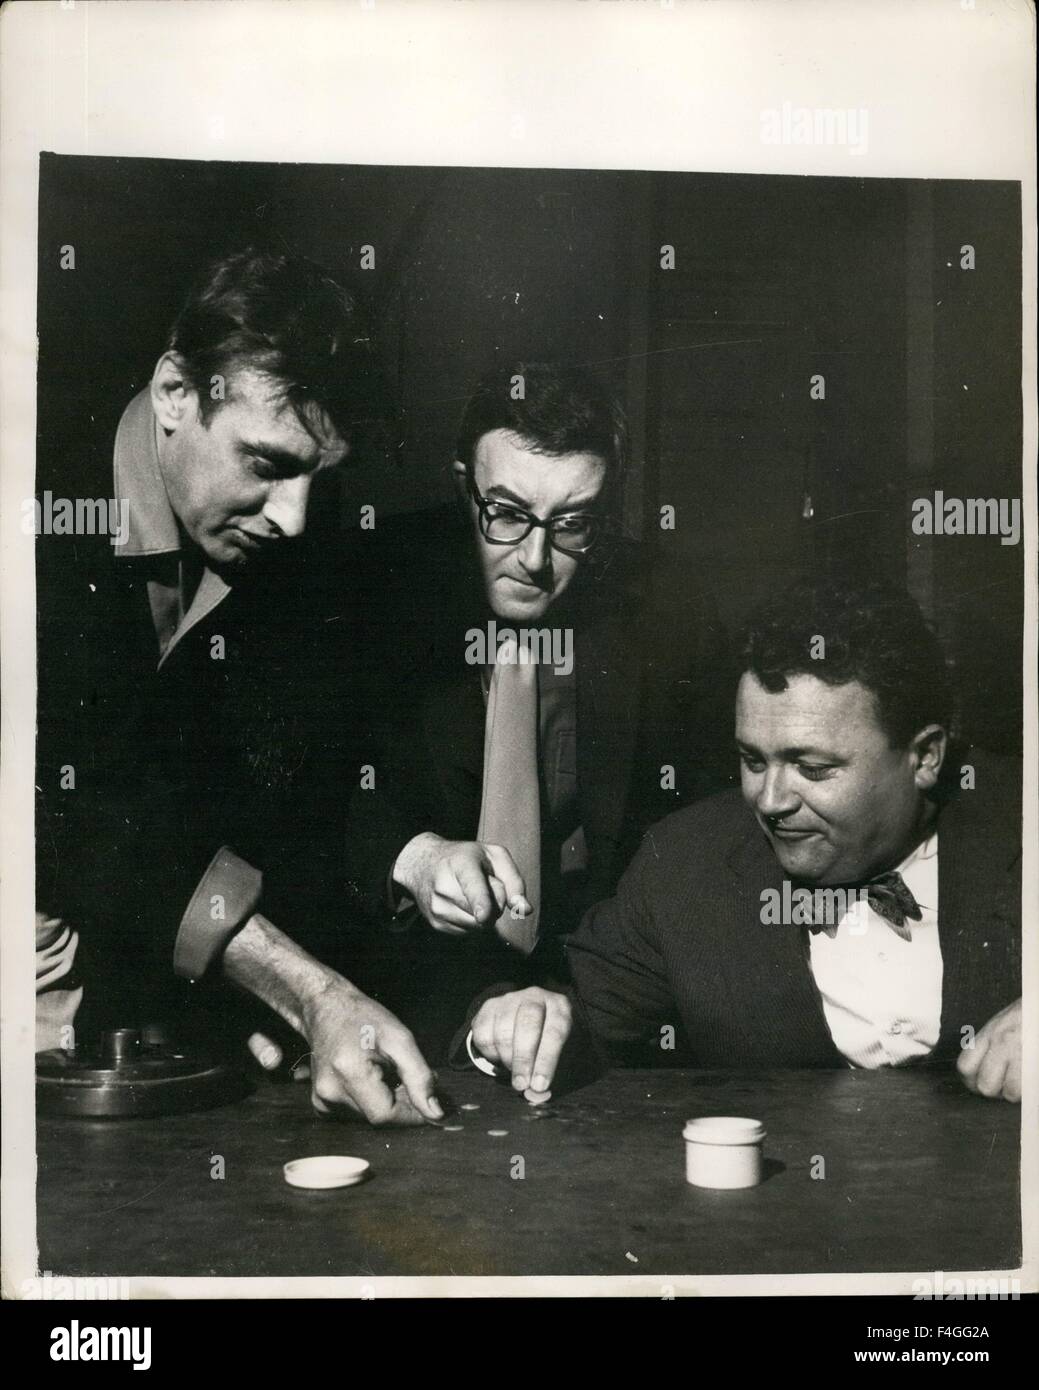 Feb. 24, 1968 - Practising for Saturday's ''Tiddlywinks'' match.: The ''Tiddly - Winks'' challenge match between ''The Goona'', whom the Duke Of Edinburgh appointed to represent him - and Cambridge University, takes place on Saturday at Cambridge. The Goonas will be skippered by Spike Milligan. Photo shows the Goons team get in a spot of practise in readiness for Saturday's ''battle''. (L to R): Spike Milligan, Peter Sellars and Harry Secombe. © Keystone Pictures USA/ZUMAPRESS.com/Alamy Live News Stock Photo